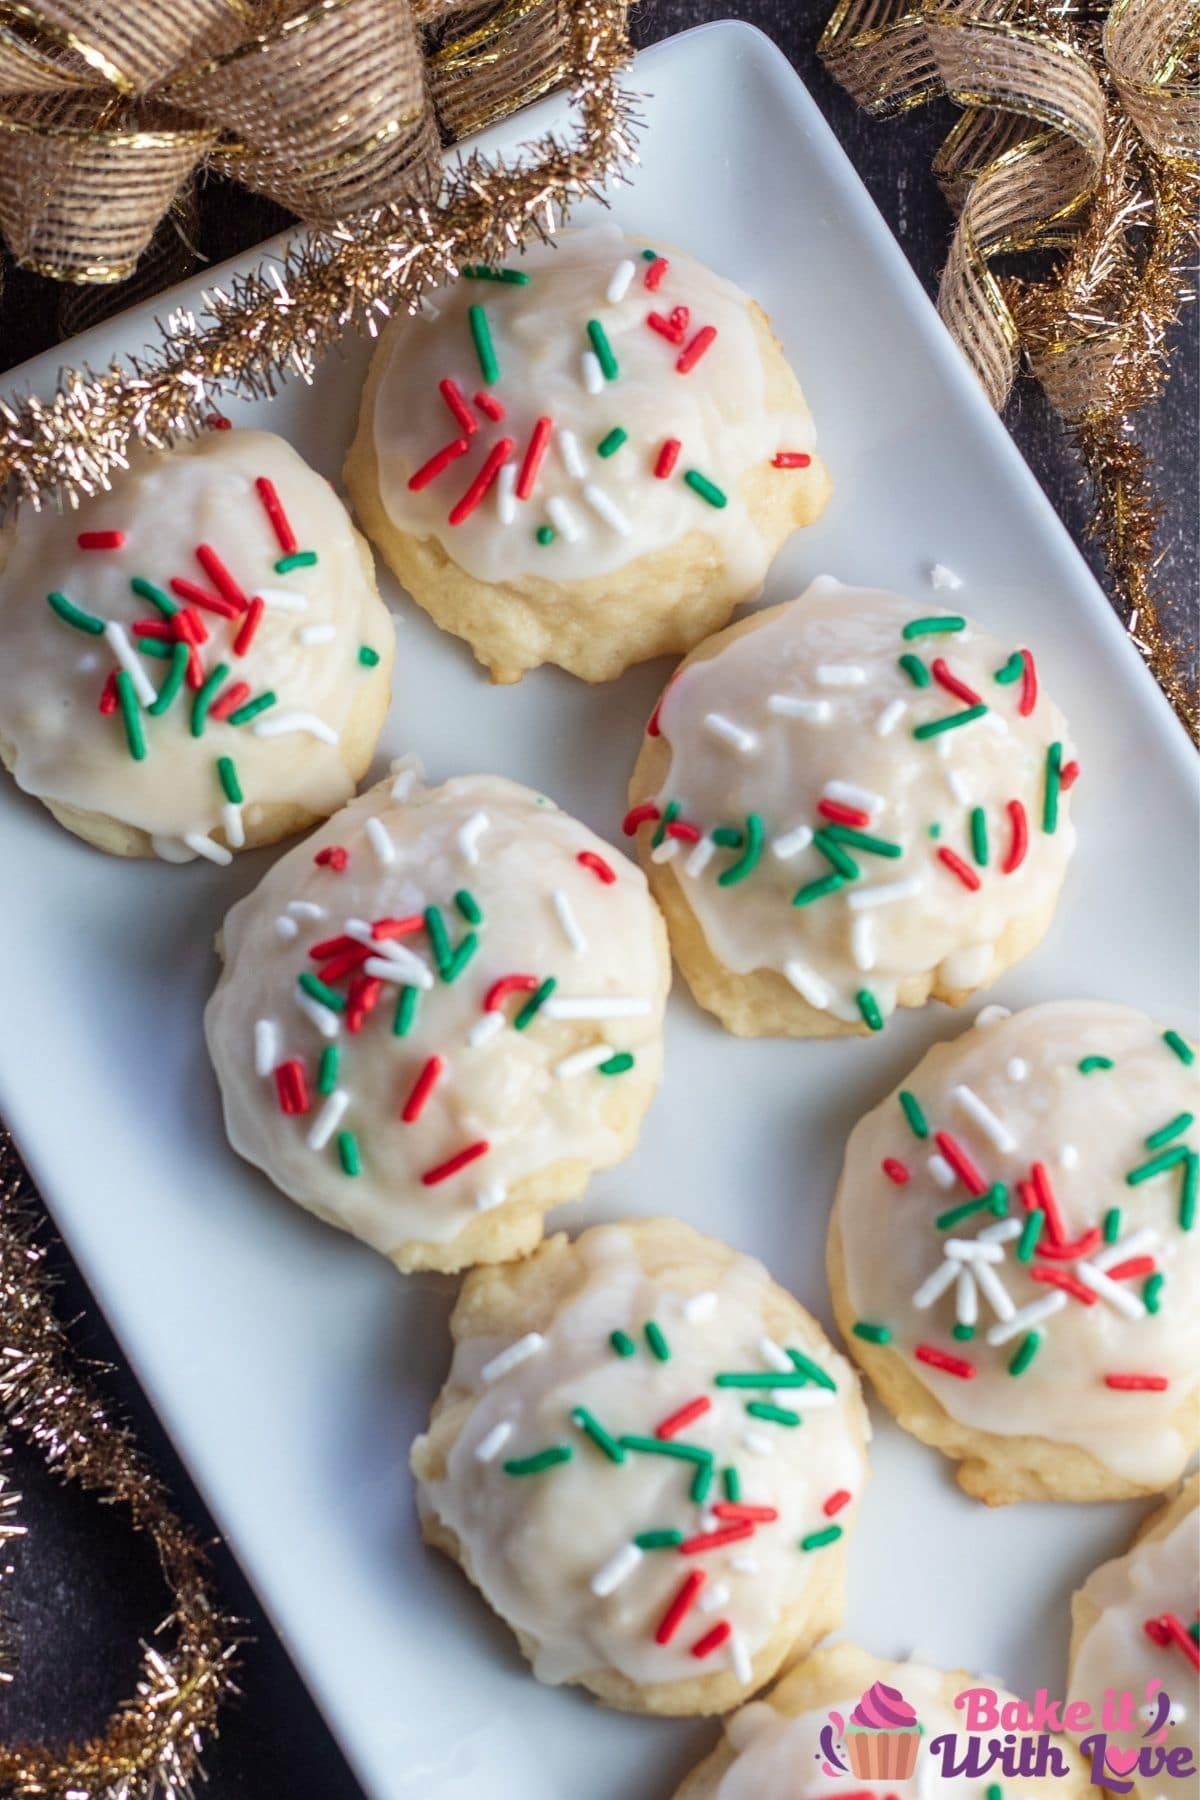 Tall overhead image of the Italian ricotta cookies served on white tray with gold holiday ribbons in background.